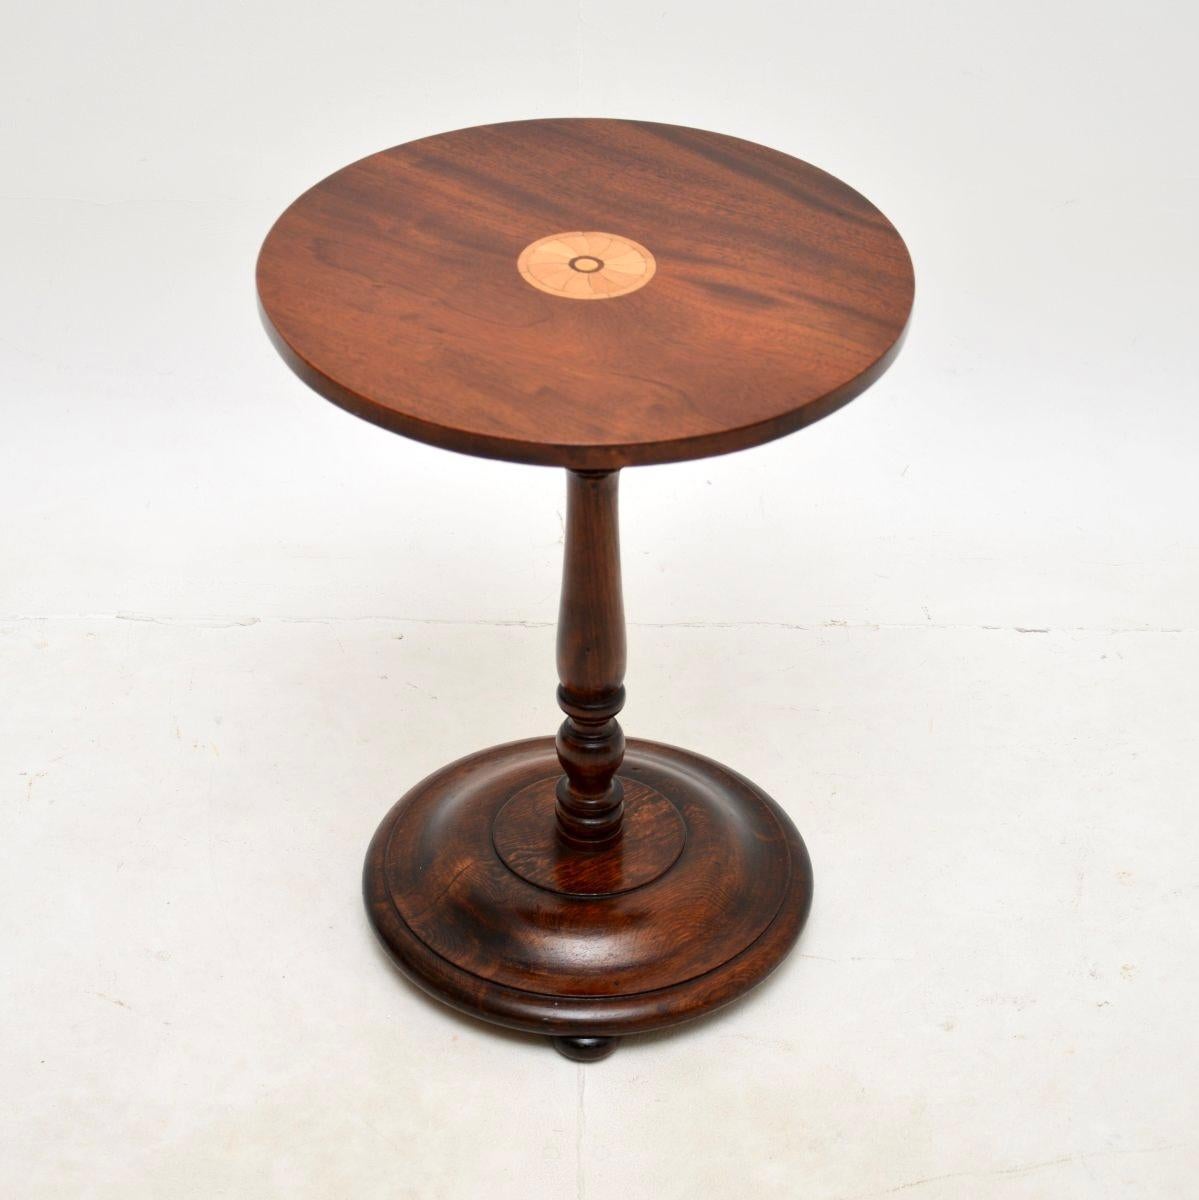 A lovely antique Victorian Style wine table, made in England and dating from around the 1920’s.

This is of superb quality, with beautiful satinwood inlay in the circular top, the base is beautifully turned from solid oak.

We have had this recently